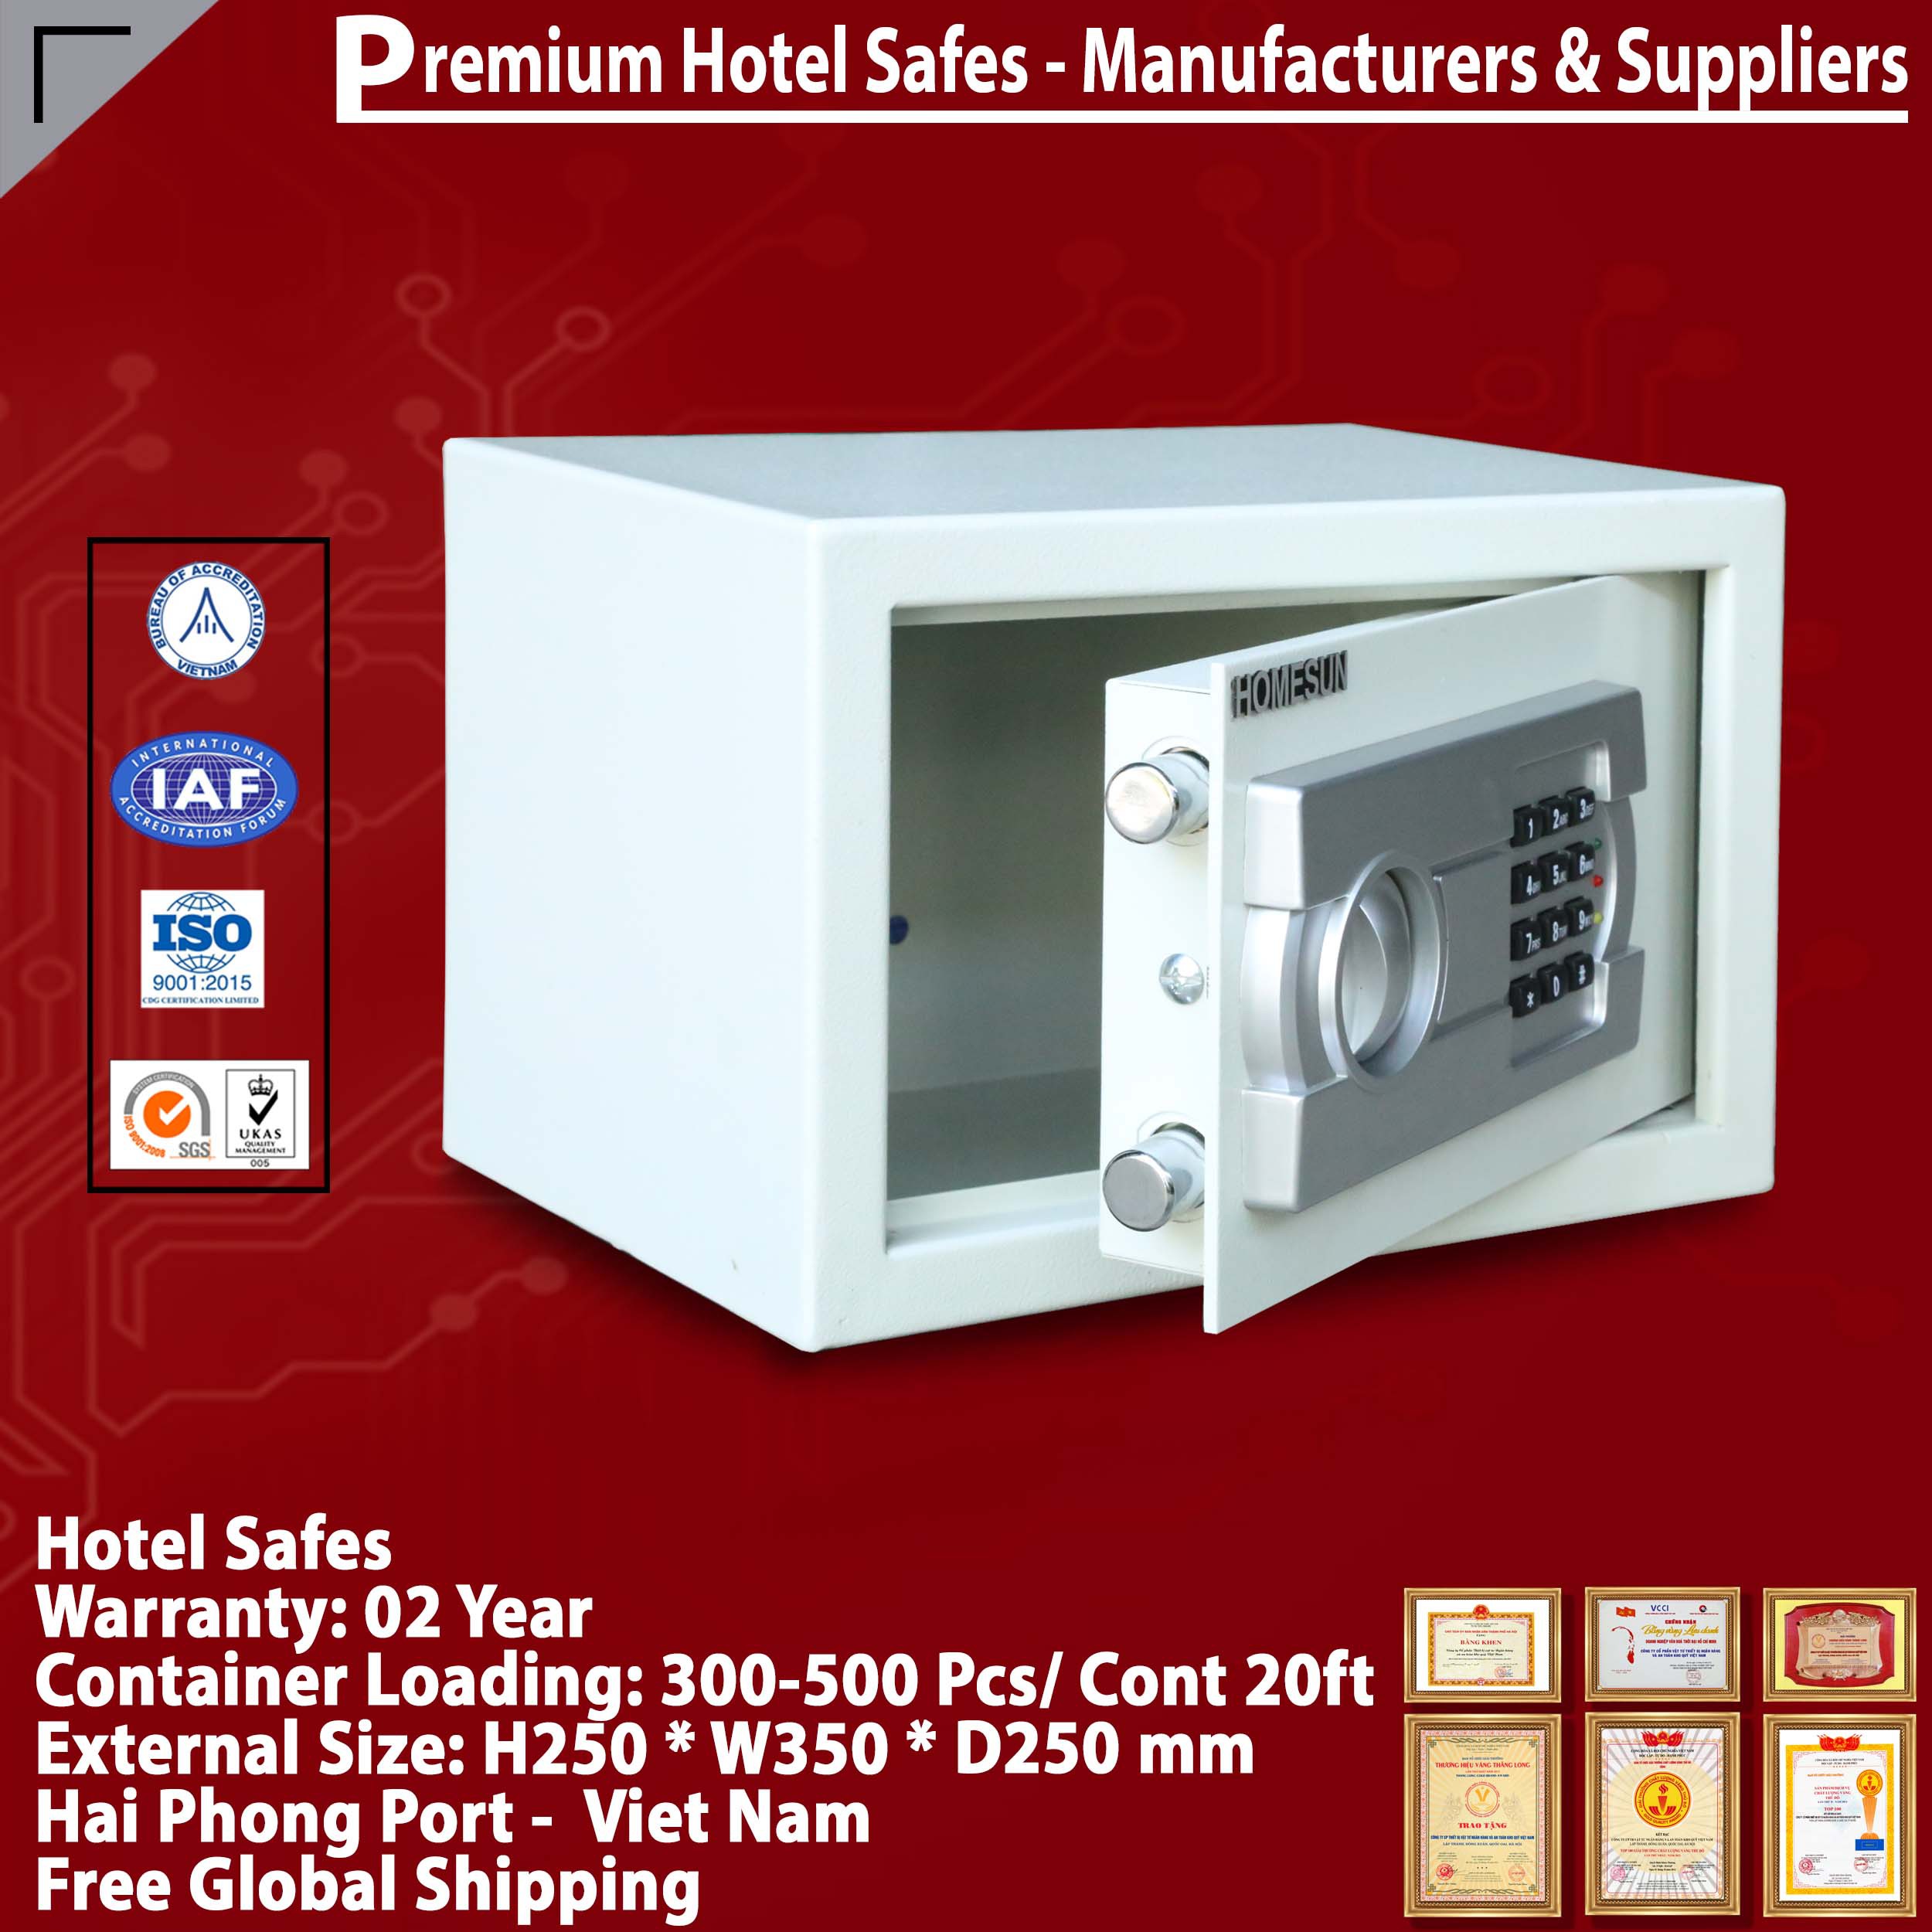 Best Hotel Safe For Home High Quality Price Ratio‎ HOMESUN